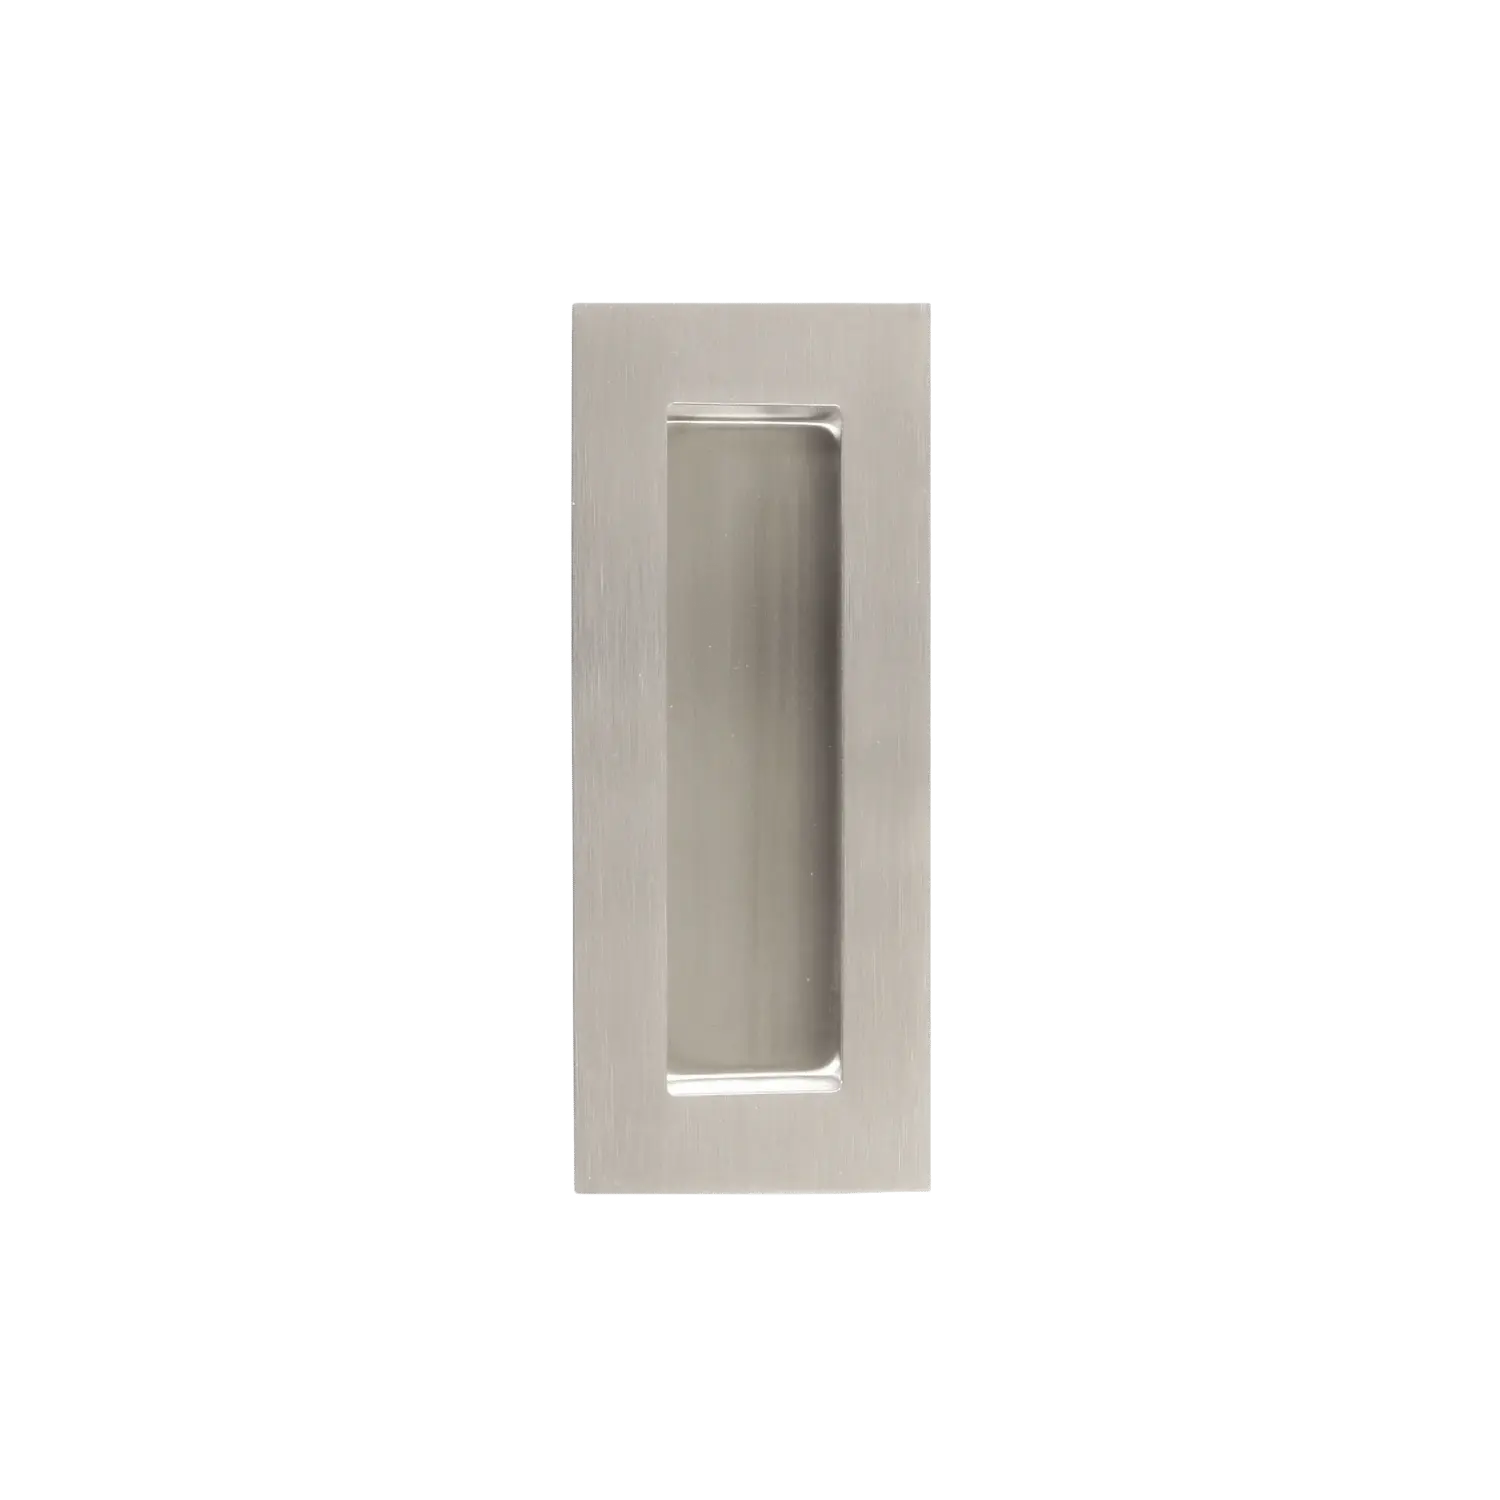 Coquille d'encastrement Rectangulaire Aveugle 125mmx51mm Inox